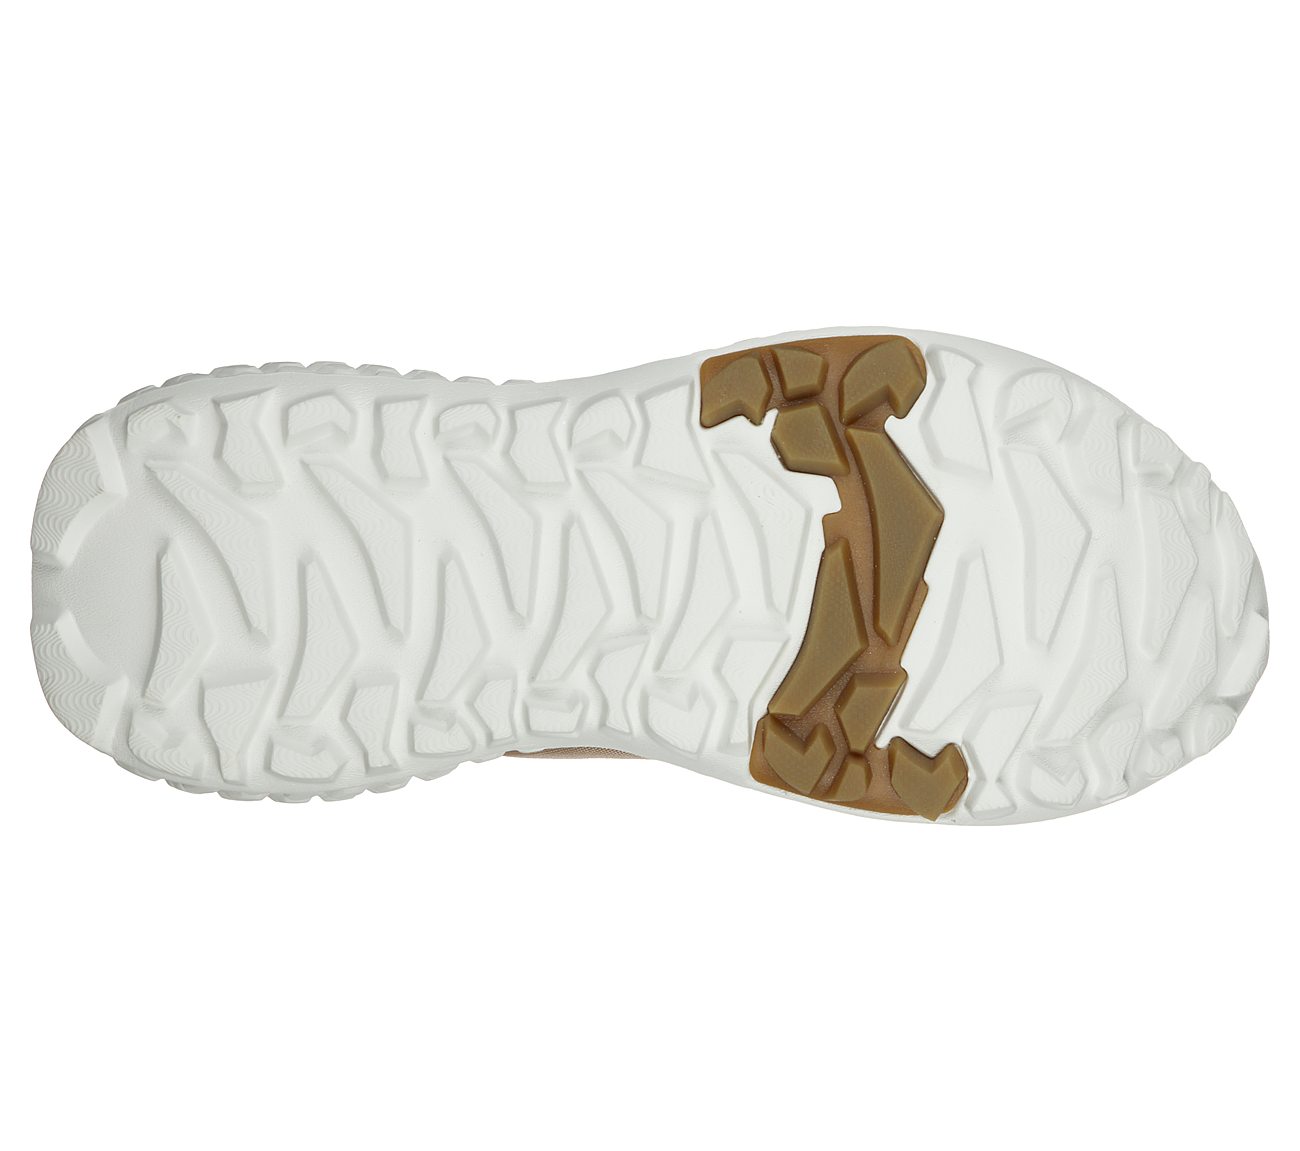 SKECHERS MONSTER, TAUPE/NATURAL Footwear Bottom View